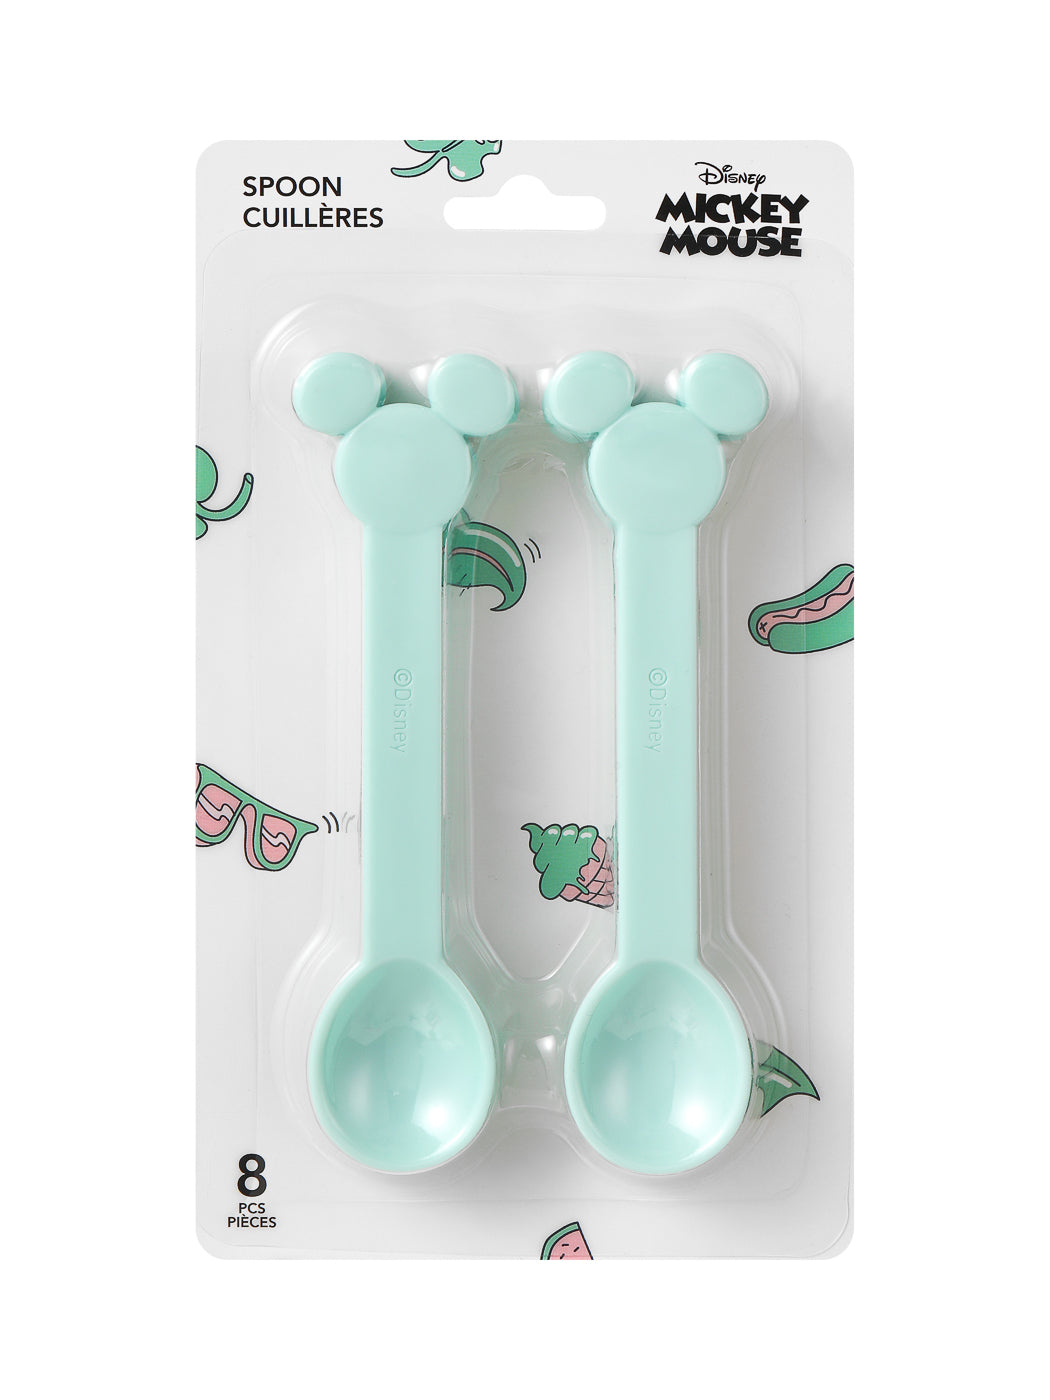 MINISO MICKEY MOUSE COLLECTION 2.0 SPOON 8PCS(MICKEY MOUSE) 2010538210107 CUTLERY SET